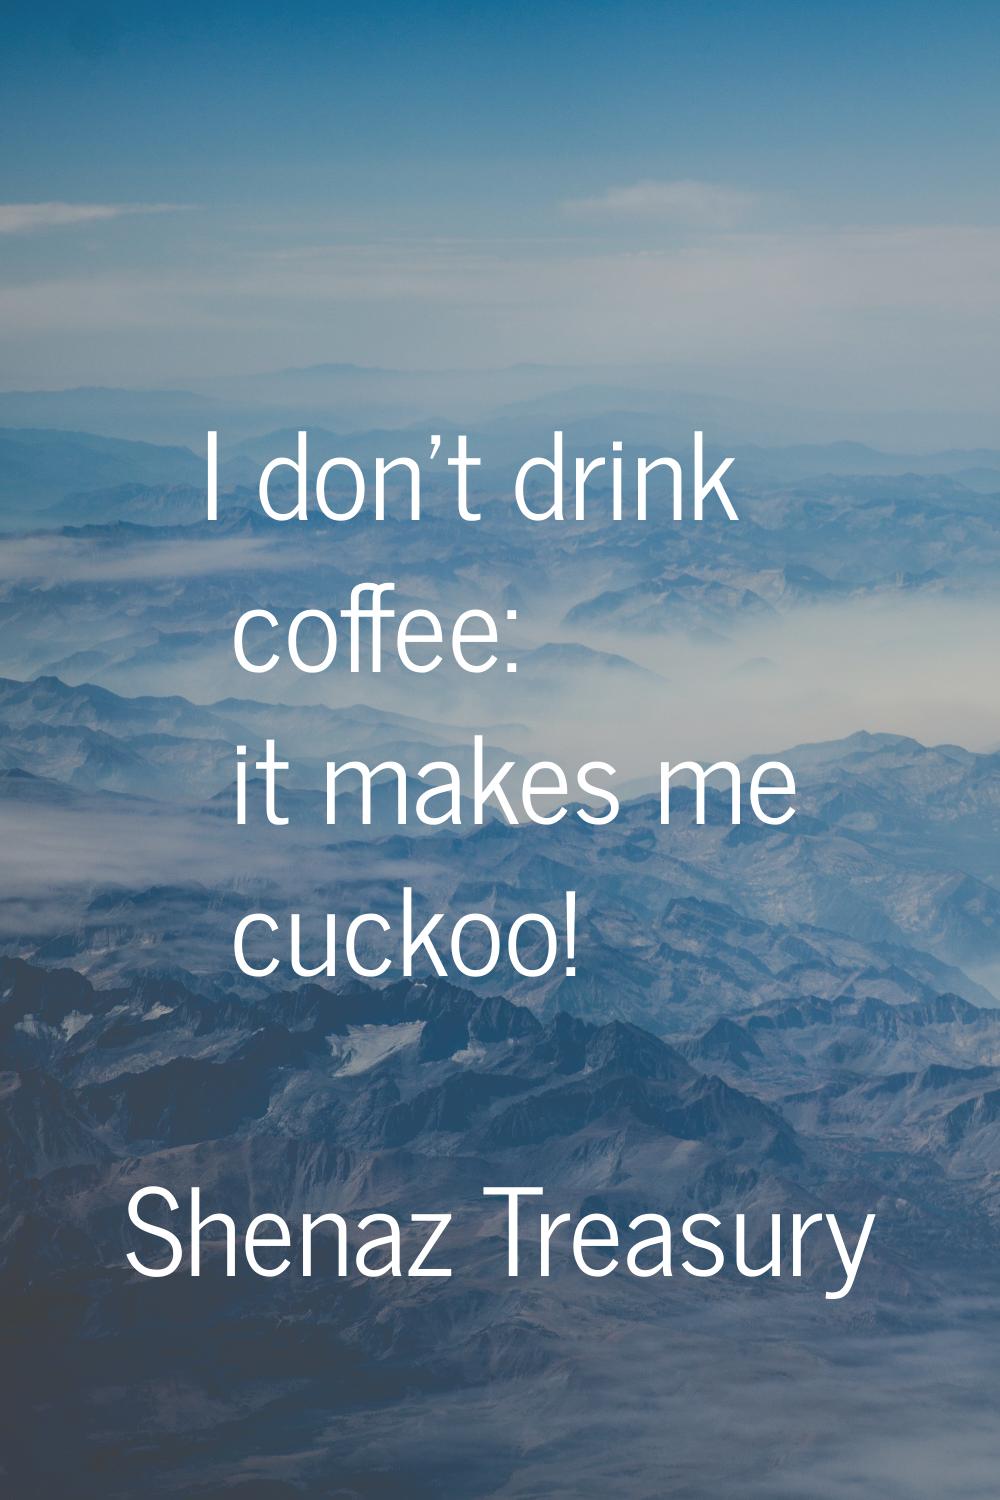 I don't drink coffee: it makes me cuckoo!